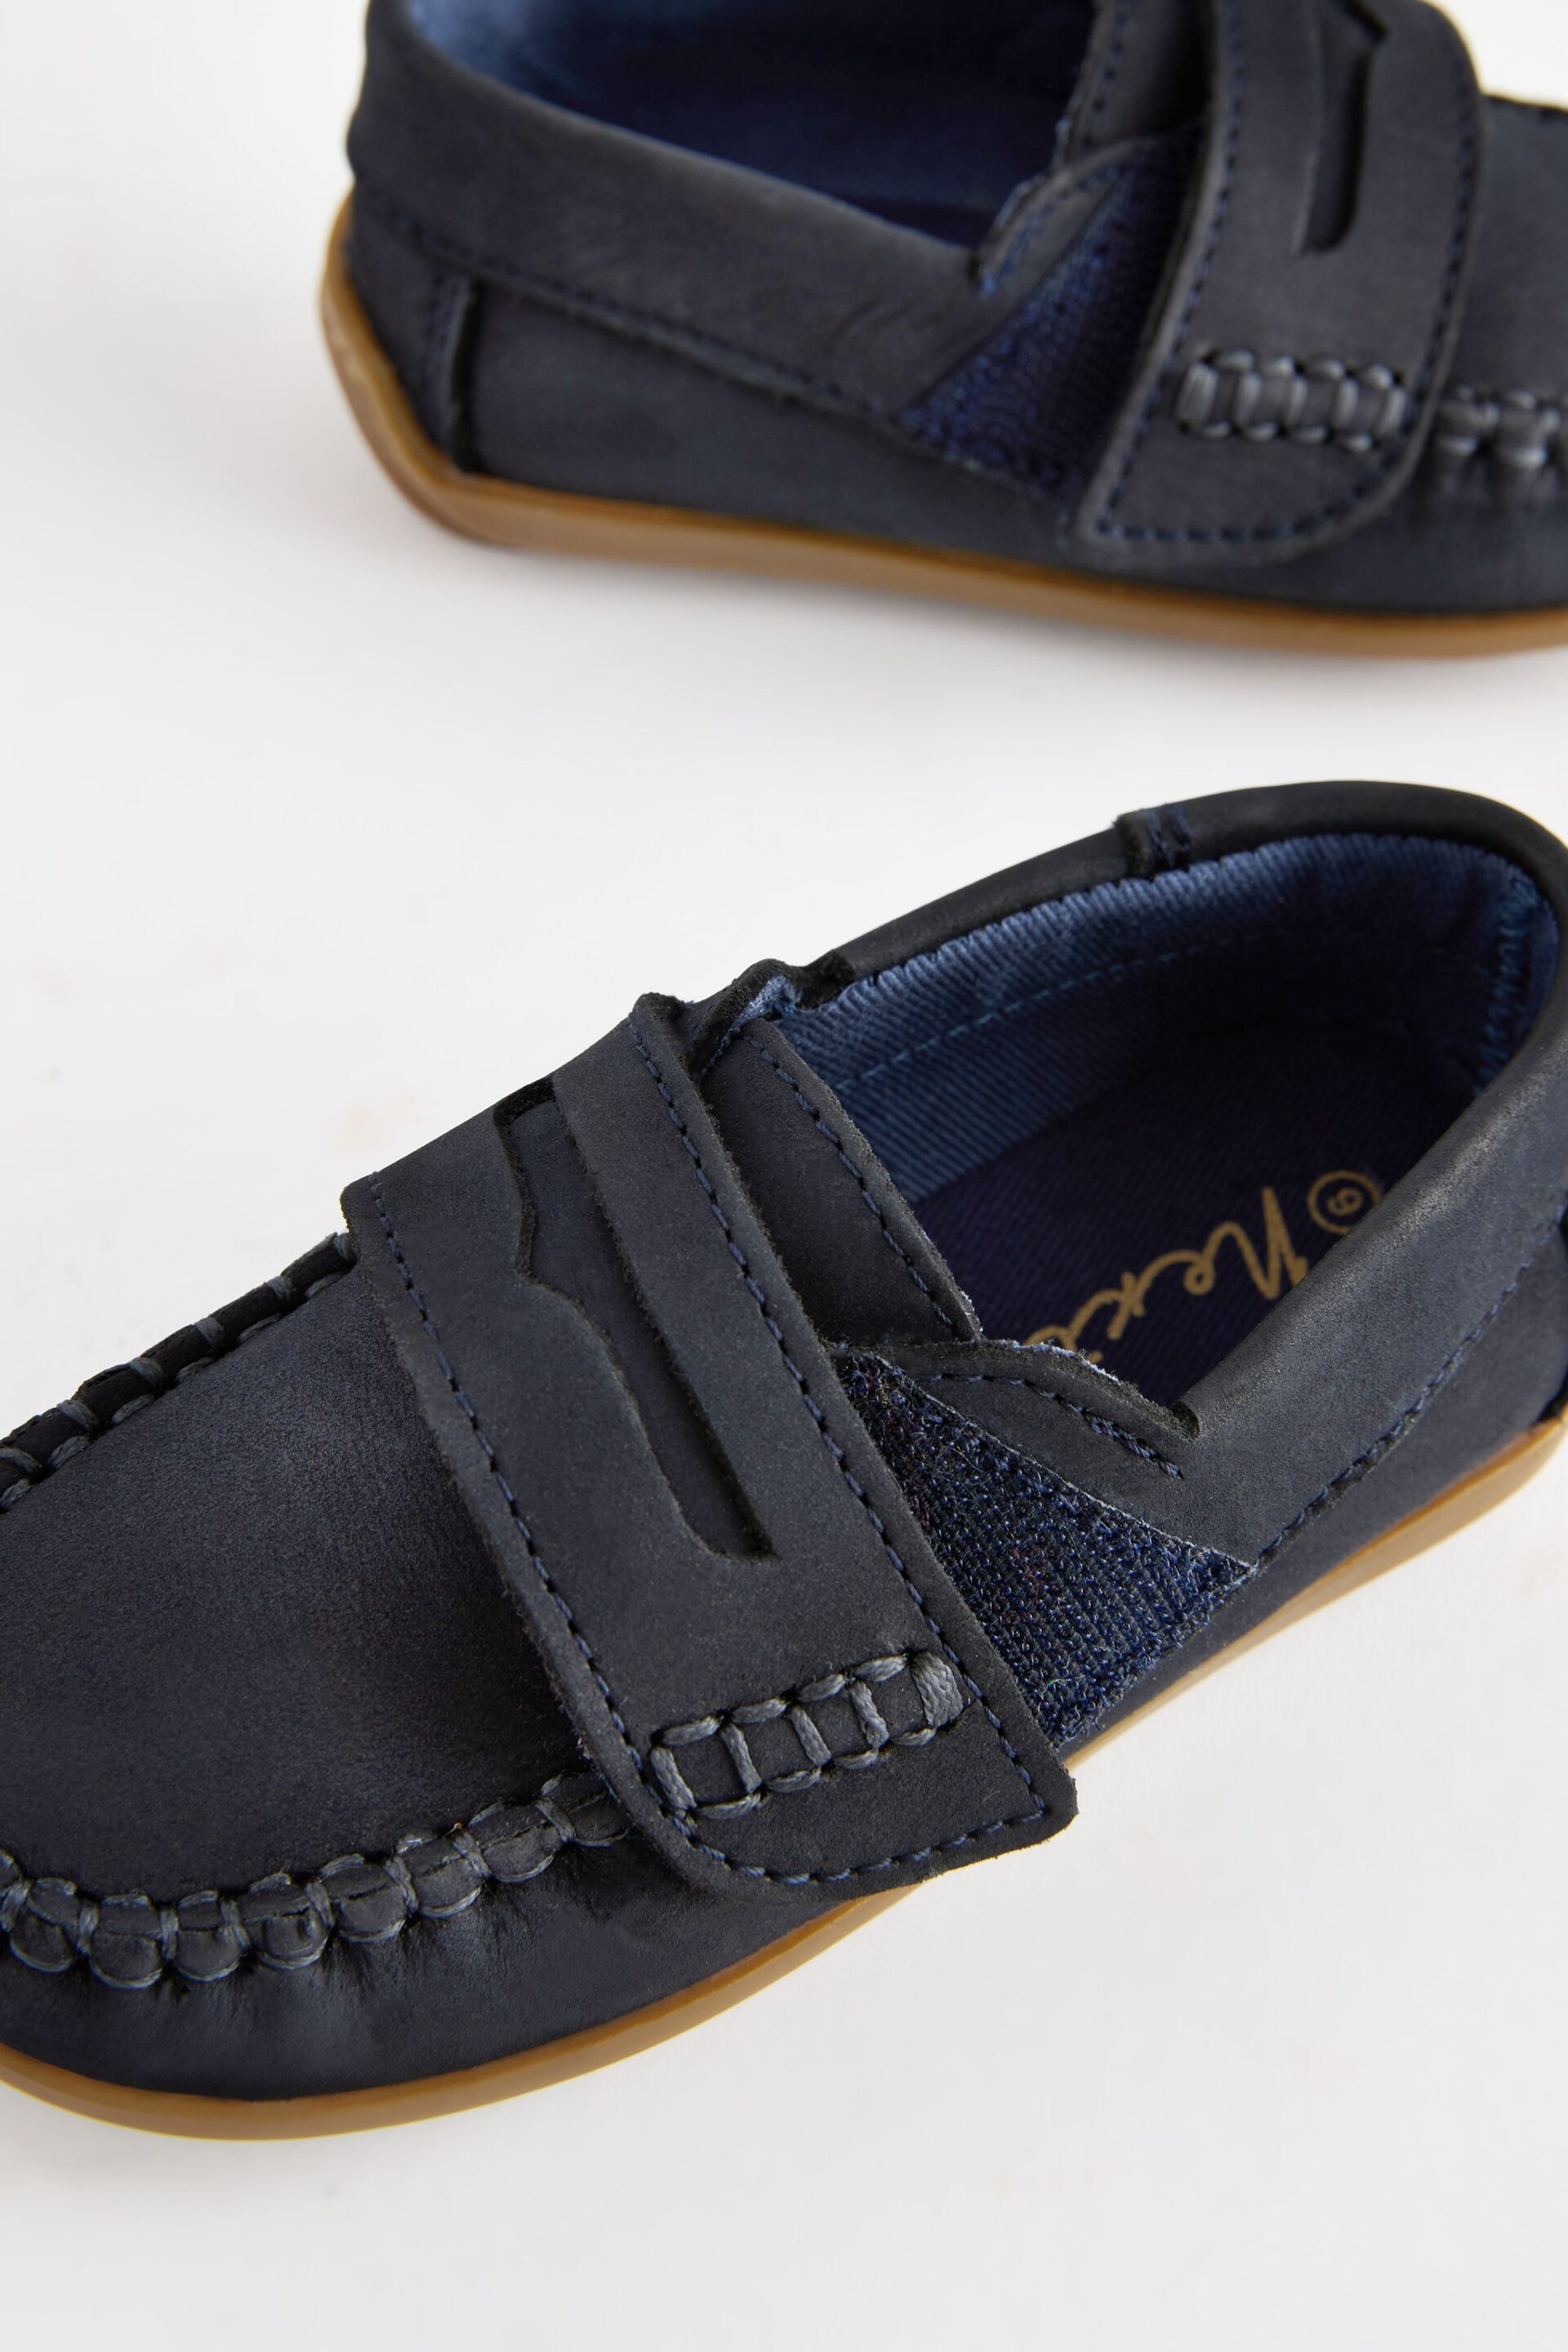 Navy Wide Fit (G) Leather Penny Loafers with Touch and Close Fastening - Image 4 of 7